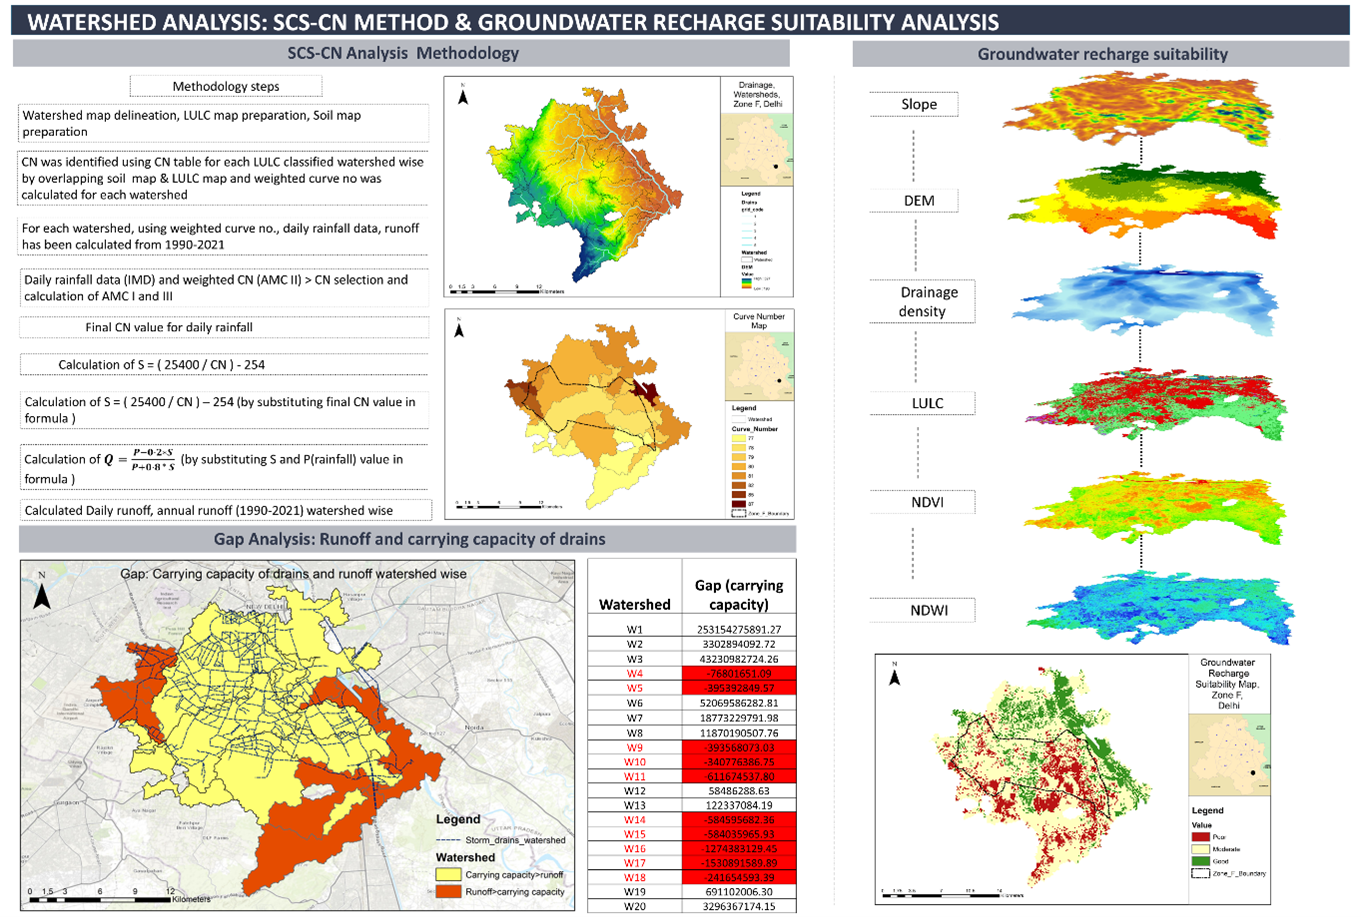 Figure 4. Watershed Analysis SCS-CN Method & Ground Recharge Suitability Analysis